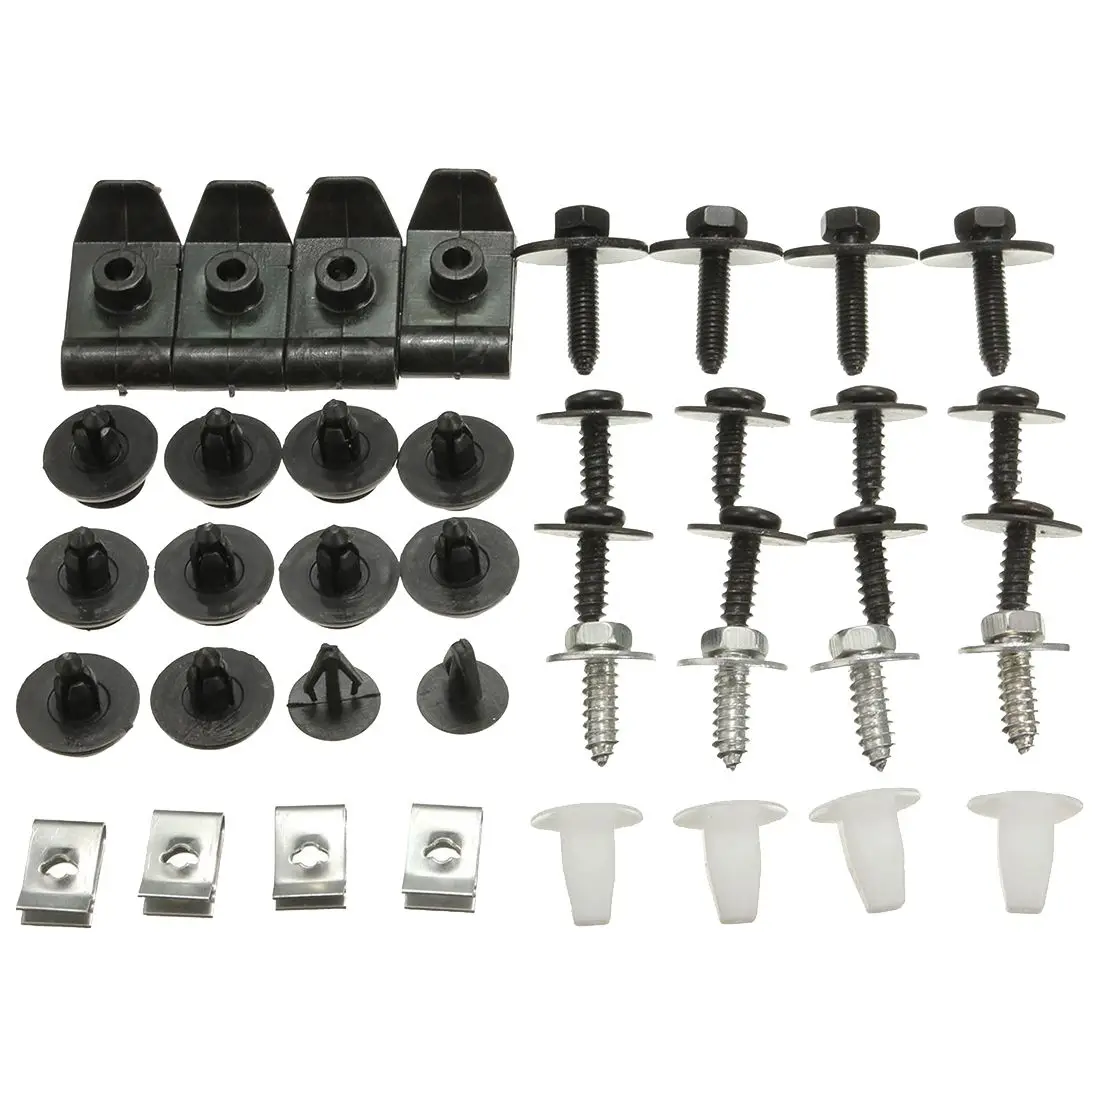 Car Engine Undertray Cover Clips Bottom Shield Guard Screws For TOYOTA AVENSIS 